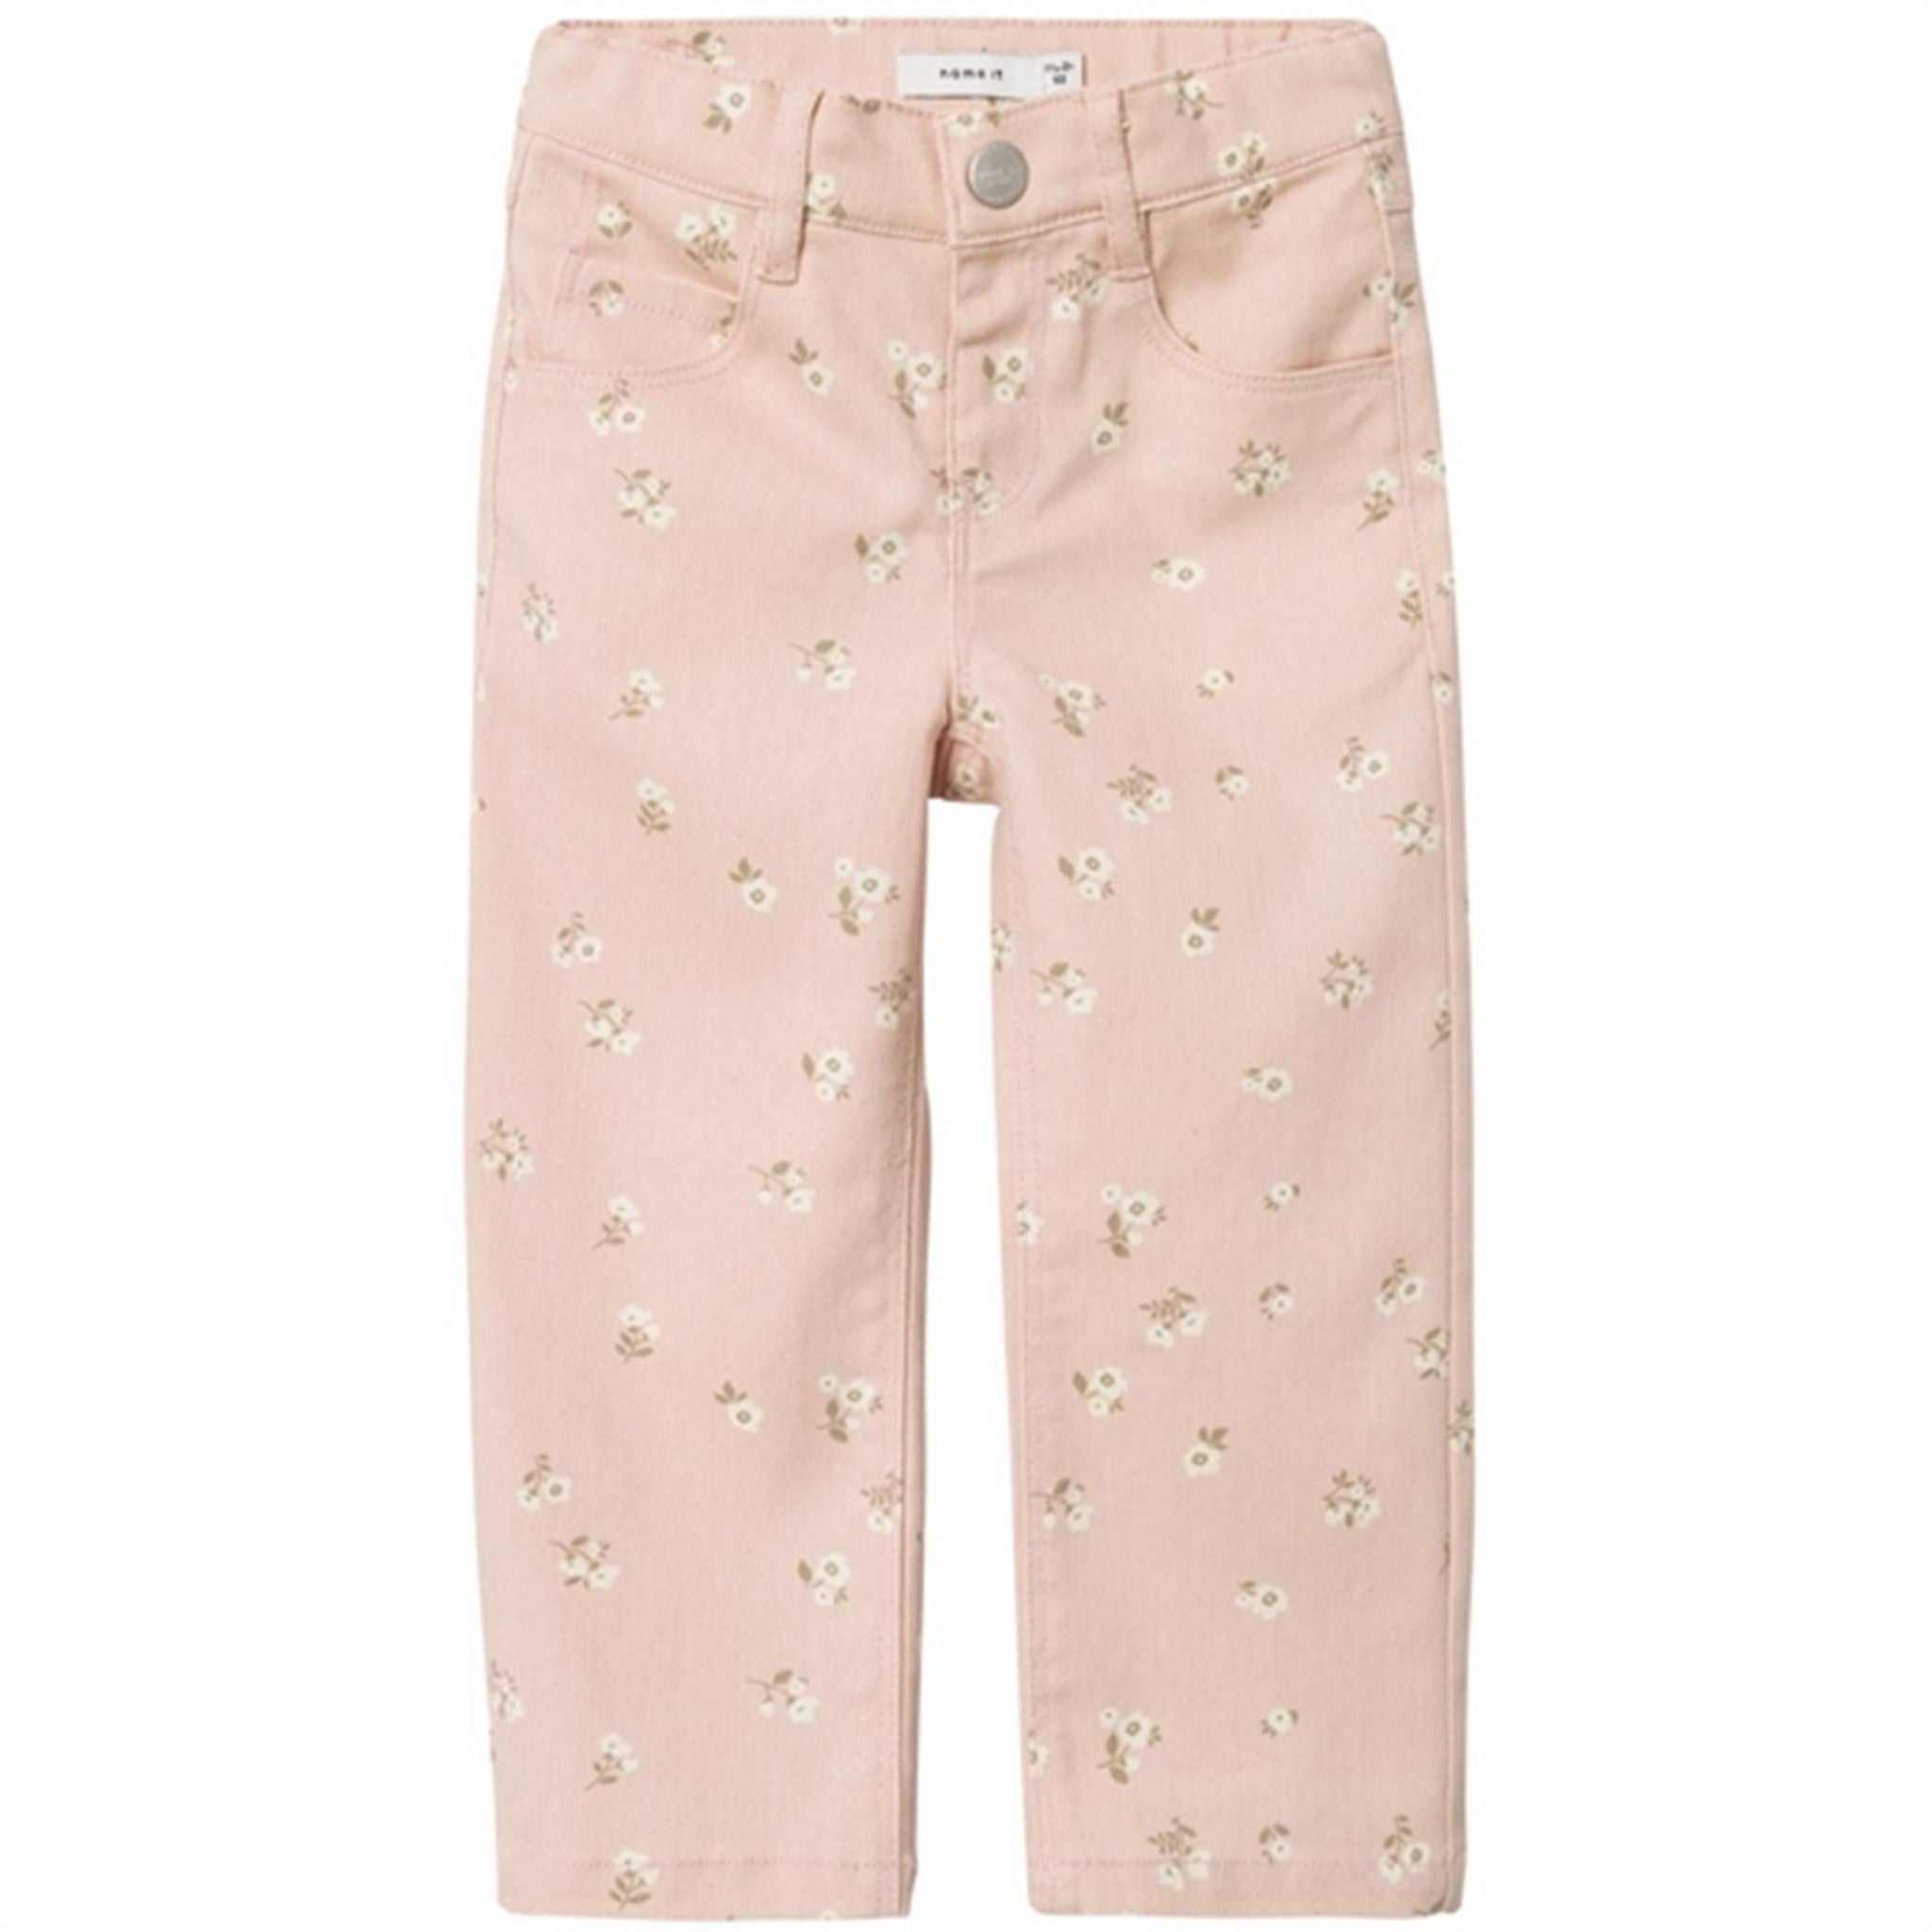 Name it Sepia Rose Floral Rose Straight Twill Pants